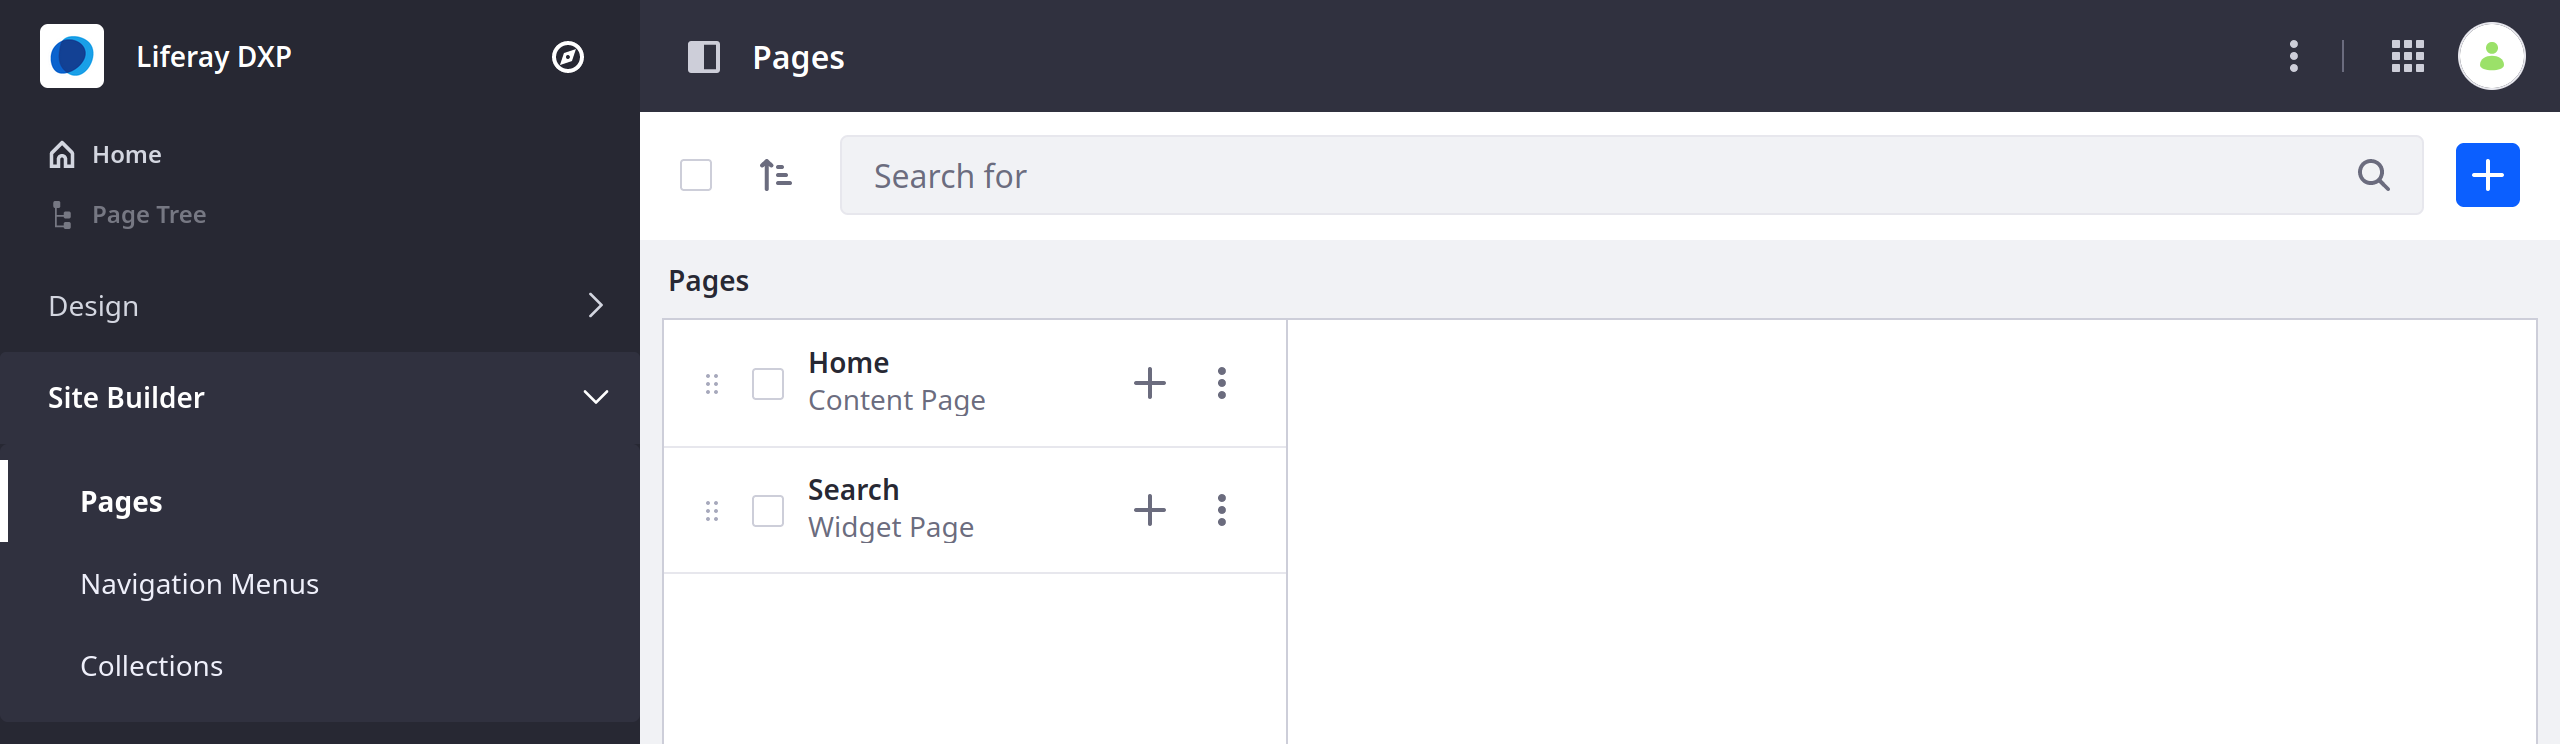 Open the Pages application to view and manage your pages hierarchy.